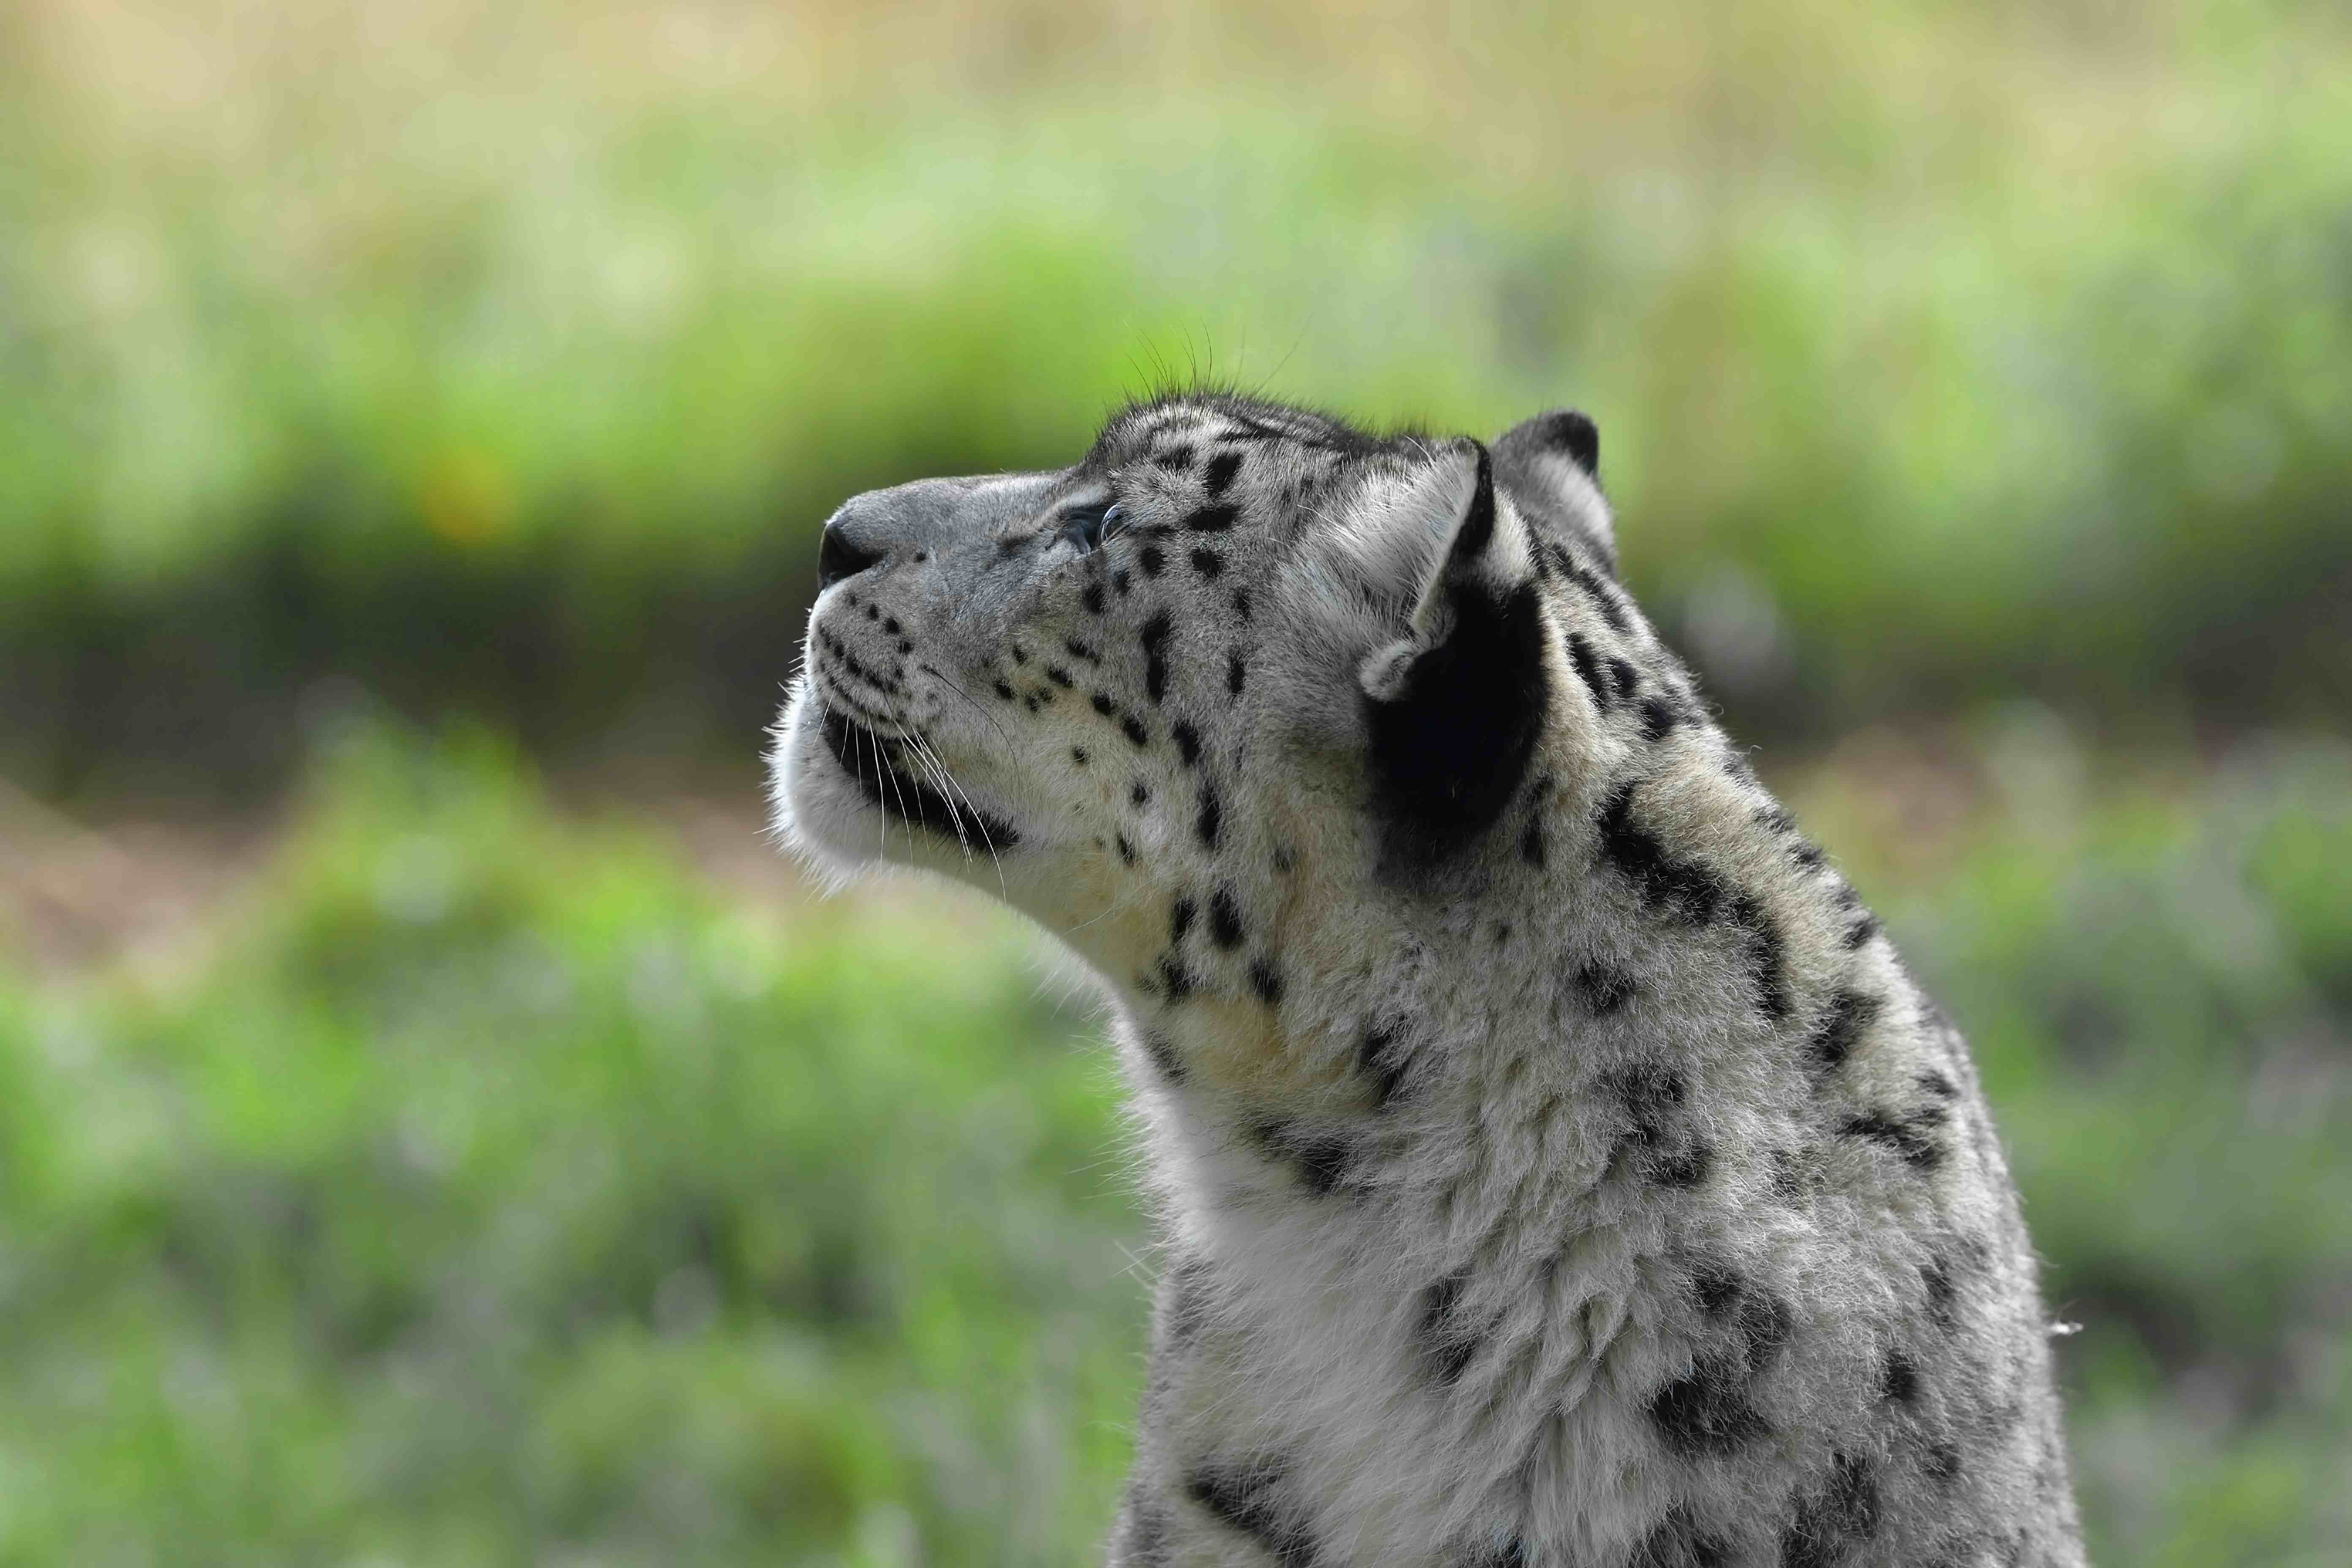 Snow leopard side profile looking up to the left IMAGE: Laurie Campbell 2023